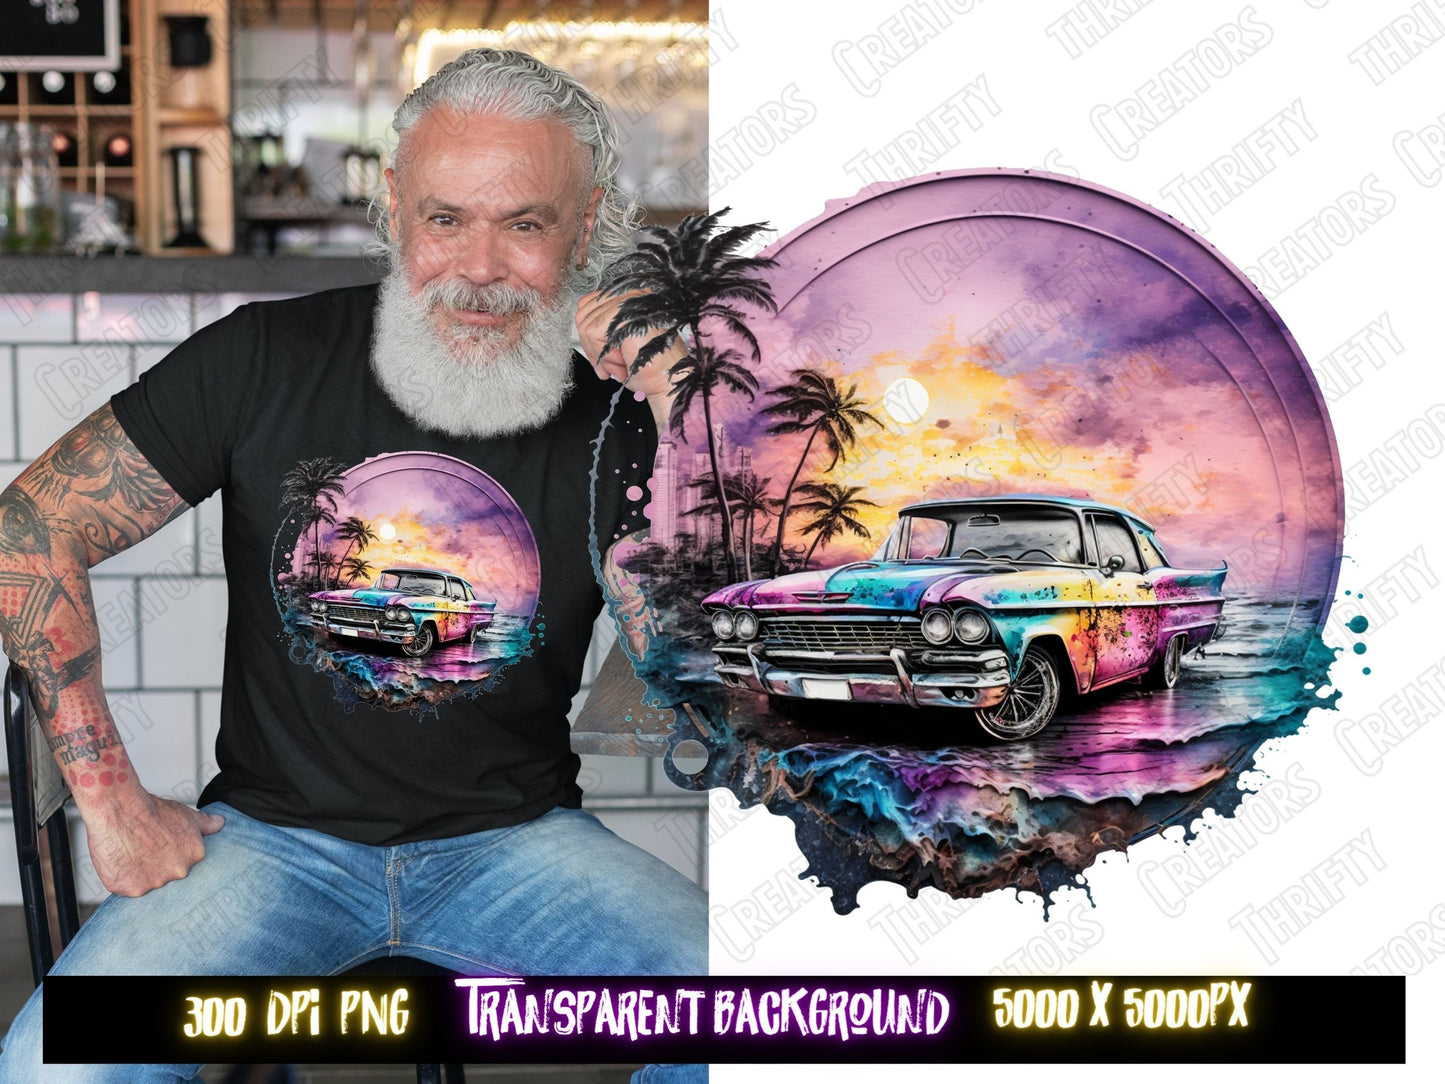 DTF png for tshirt designs, png files for sublimate, png, dtf designs, sublimate shirt designs, trend png, graphic tee png, retro car sunset